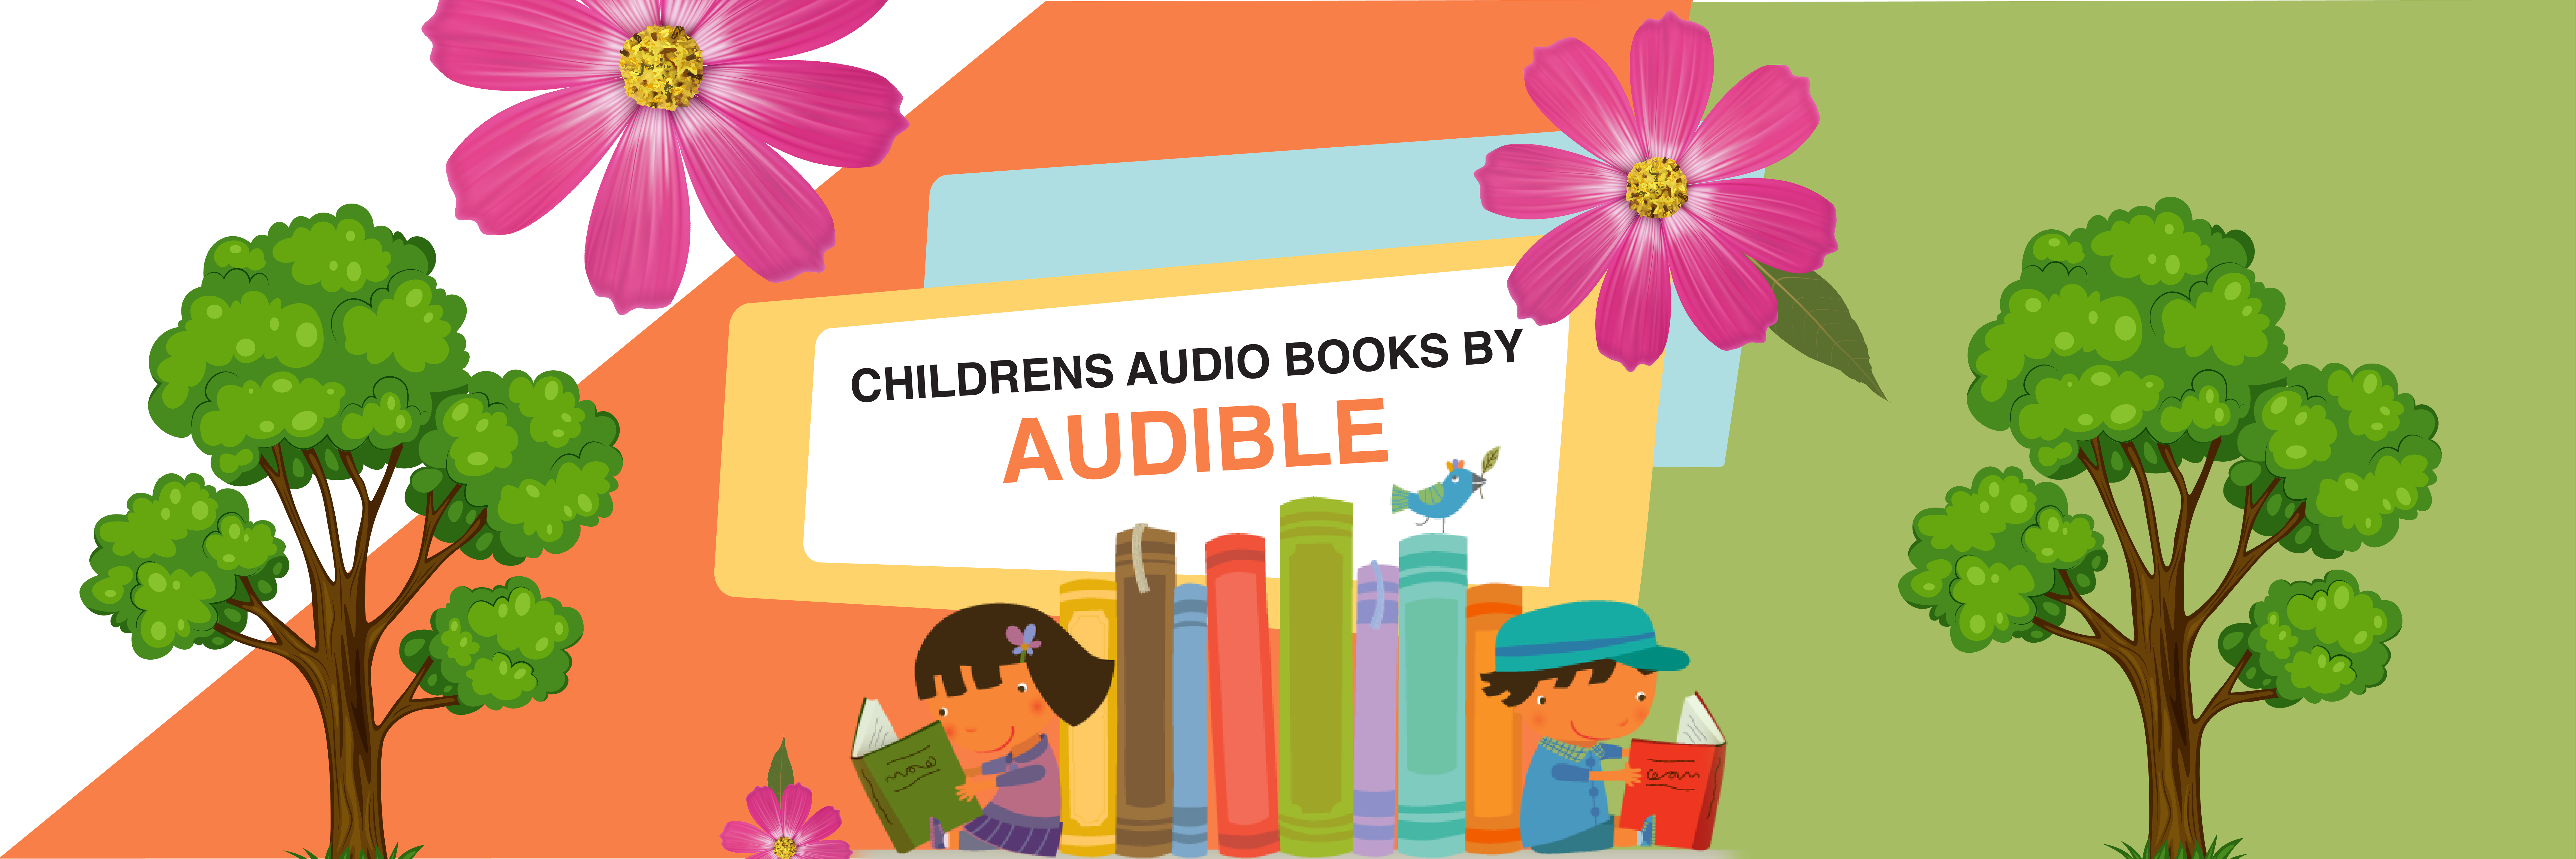 Audible Books Playback banner